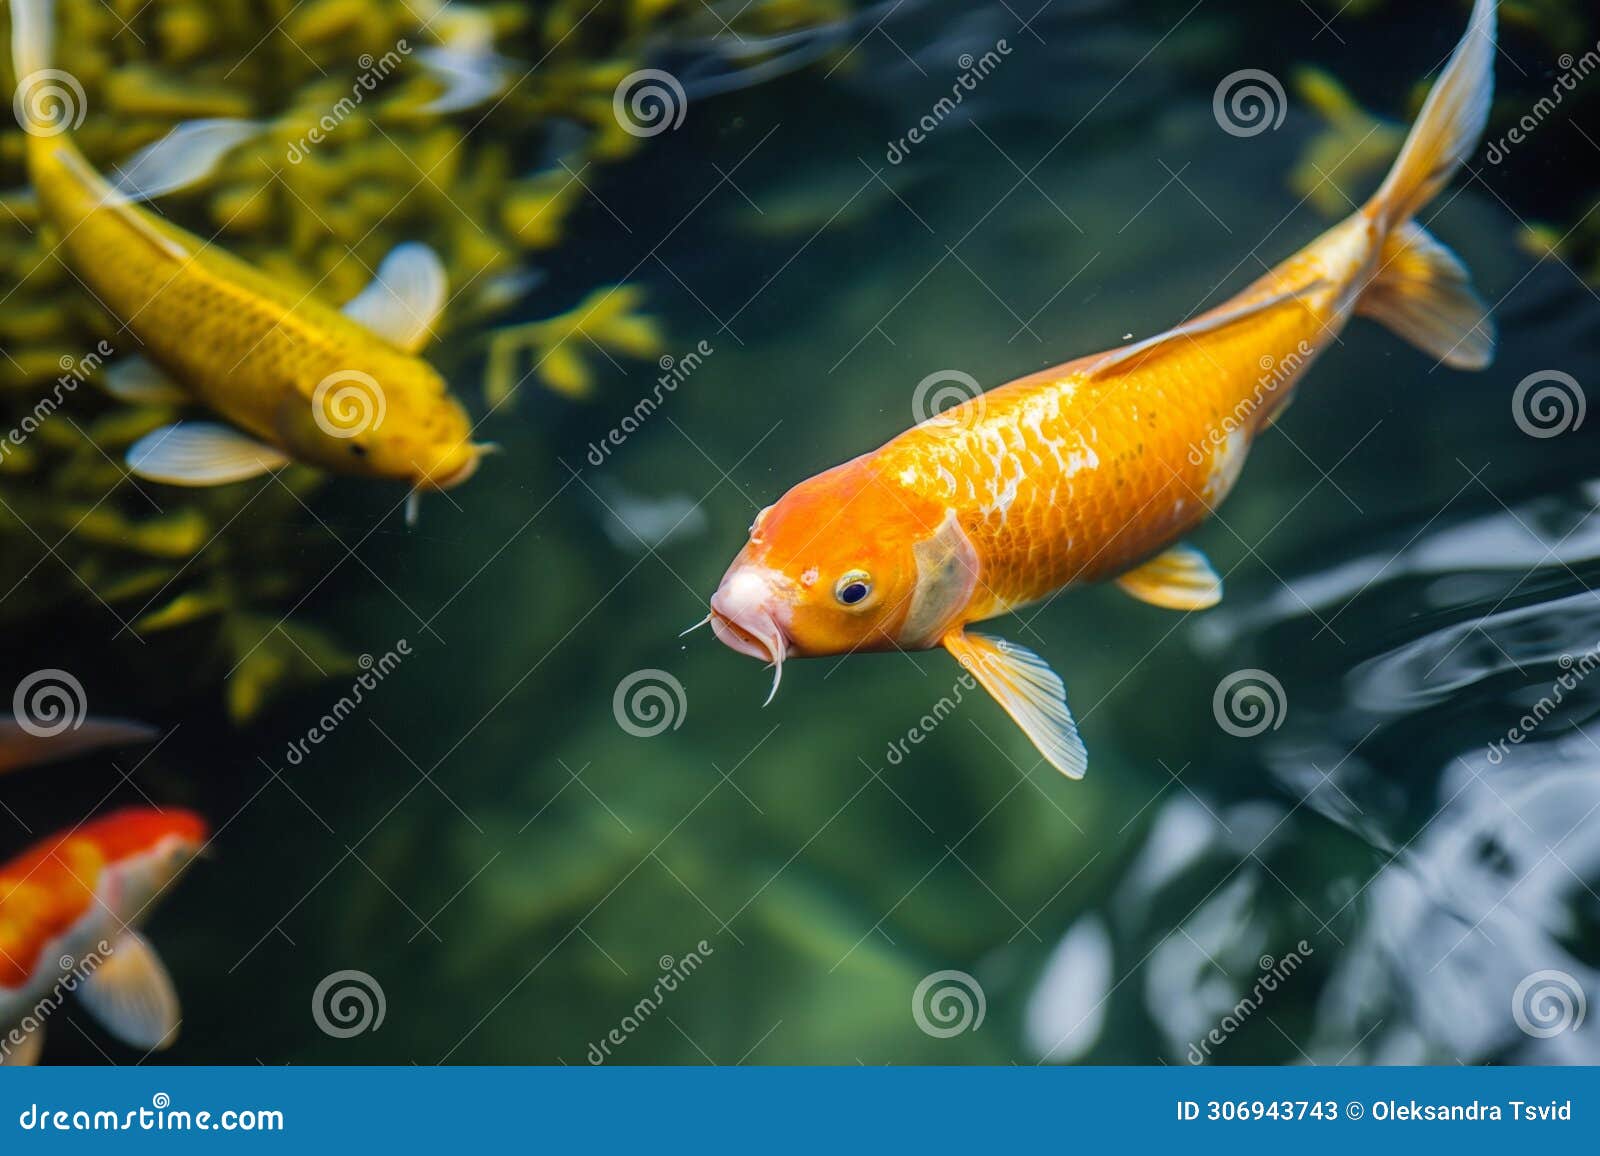 Koi Fish Swimming, Colorful Decorative Fish Float in an Artificial